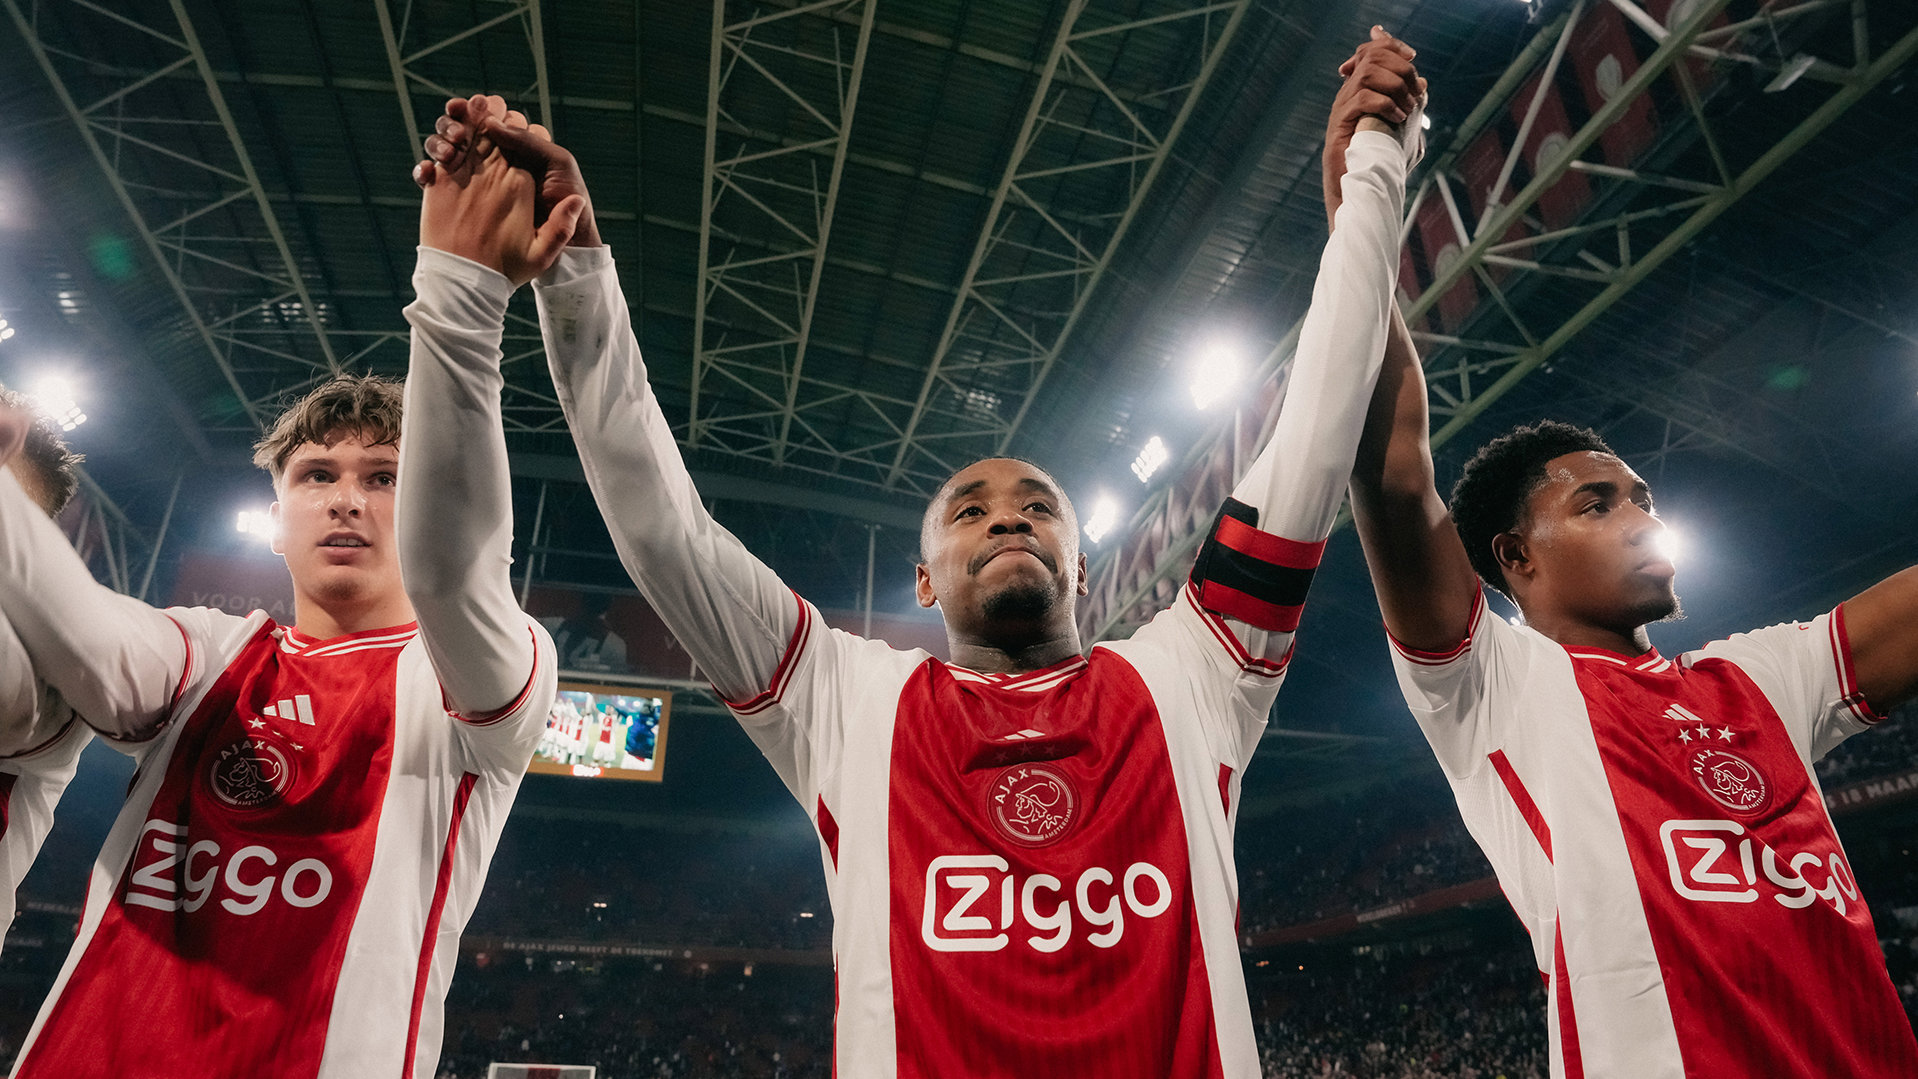 weTalk Ajax on X: UPDATE: The KNVB Cup match between Hercules and Ajax is  scheduled for December 21 - 18:45 CET. The away match against the amateurs  from Utrecht will take place